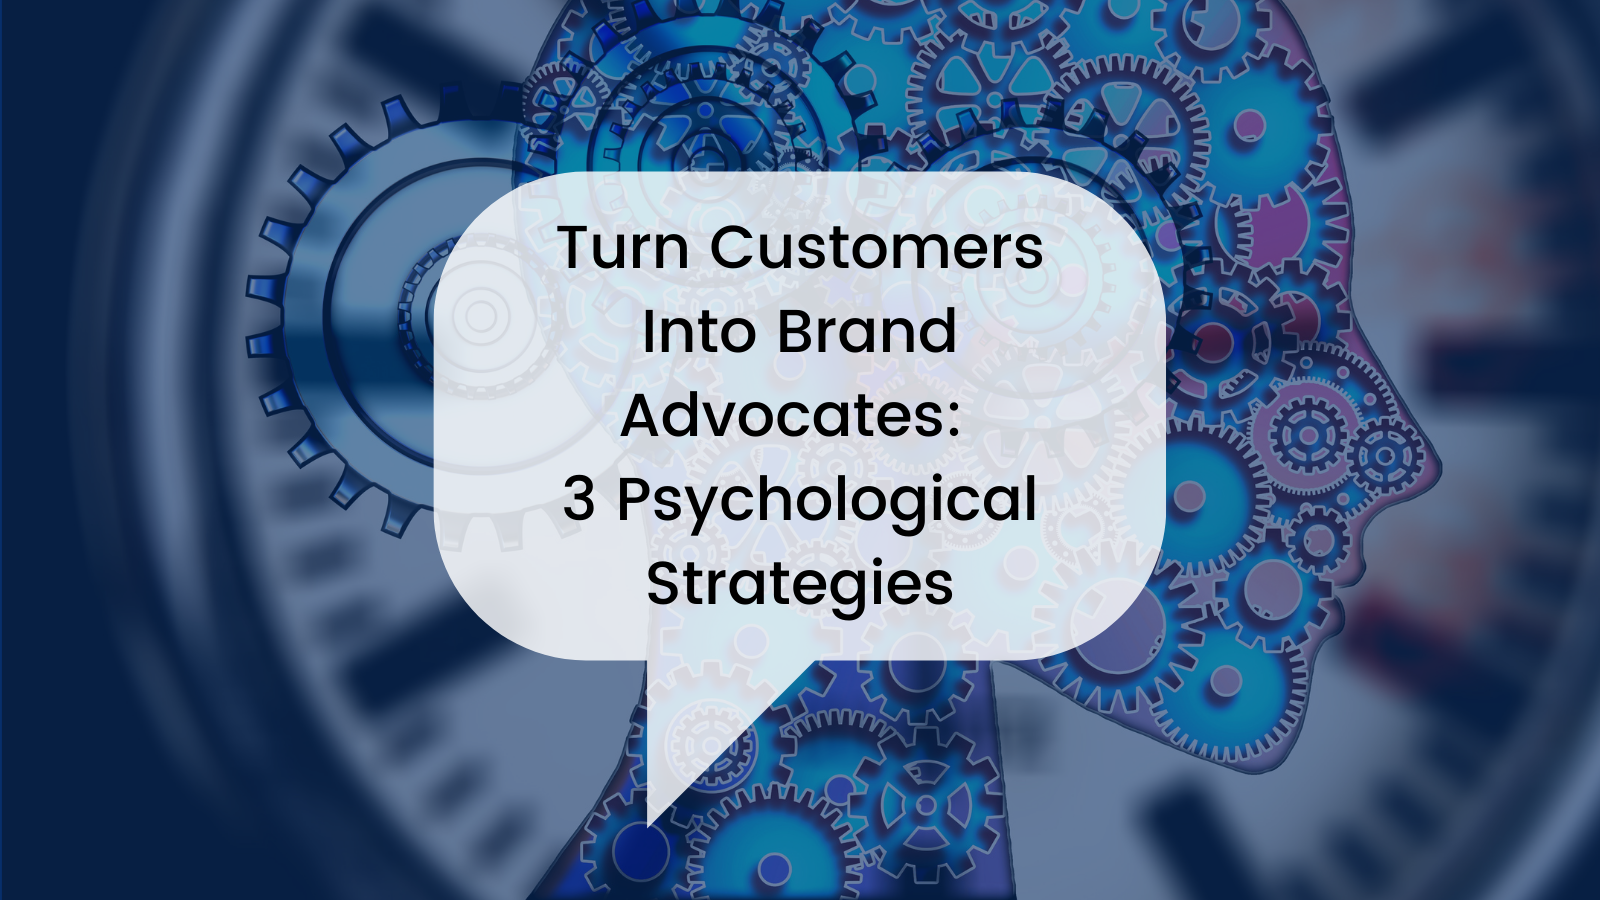 Turn Customers into Brand Advocates: 3 Psychological Strategies